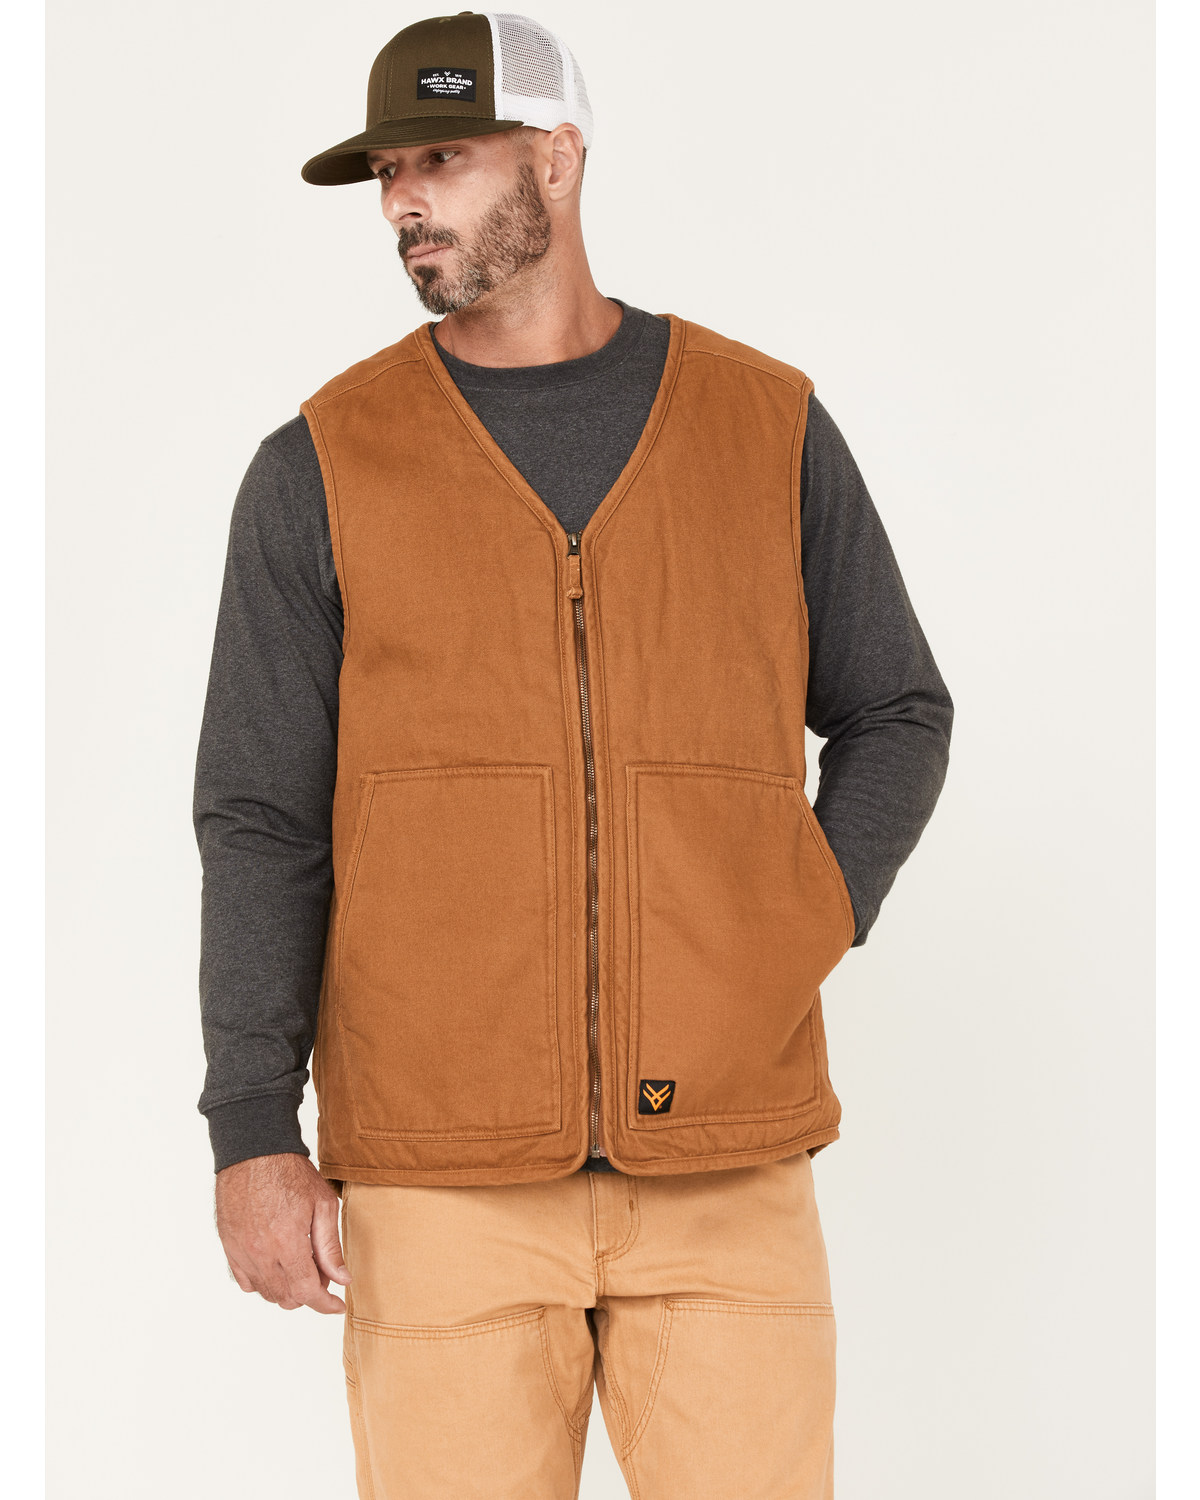 Hawx Men's Weathered Canvas Sherpa Lined Vest